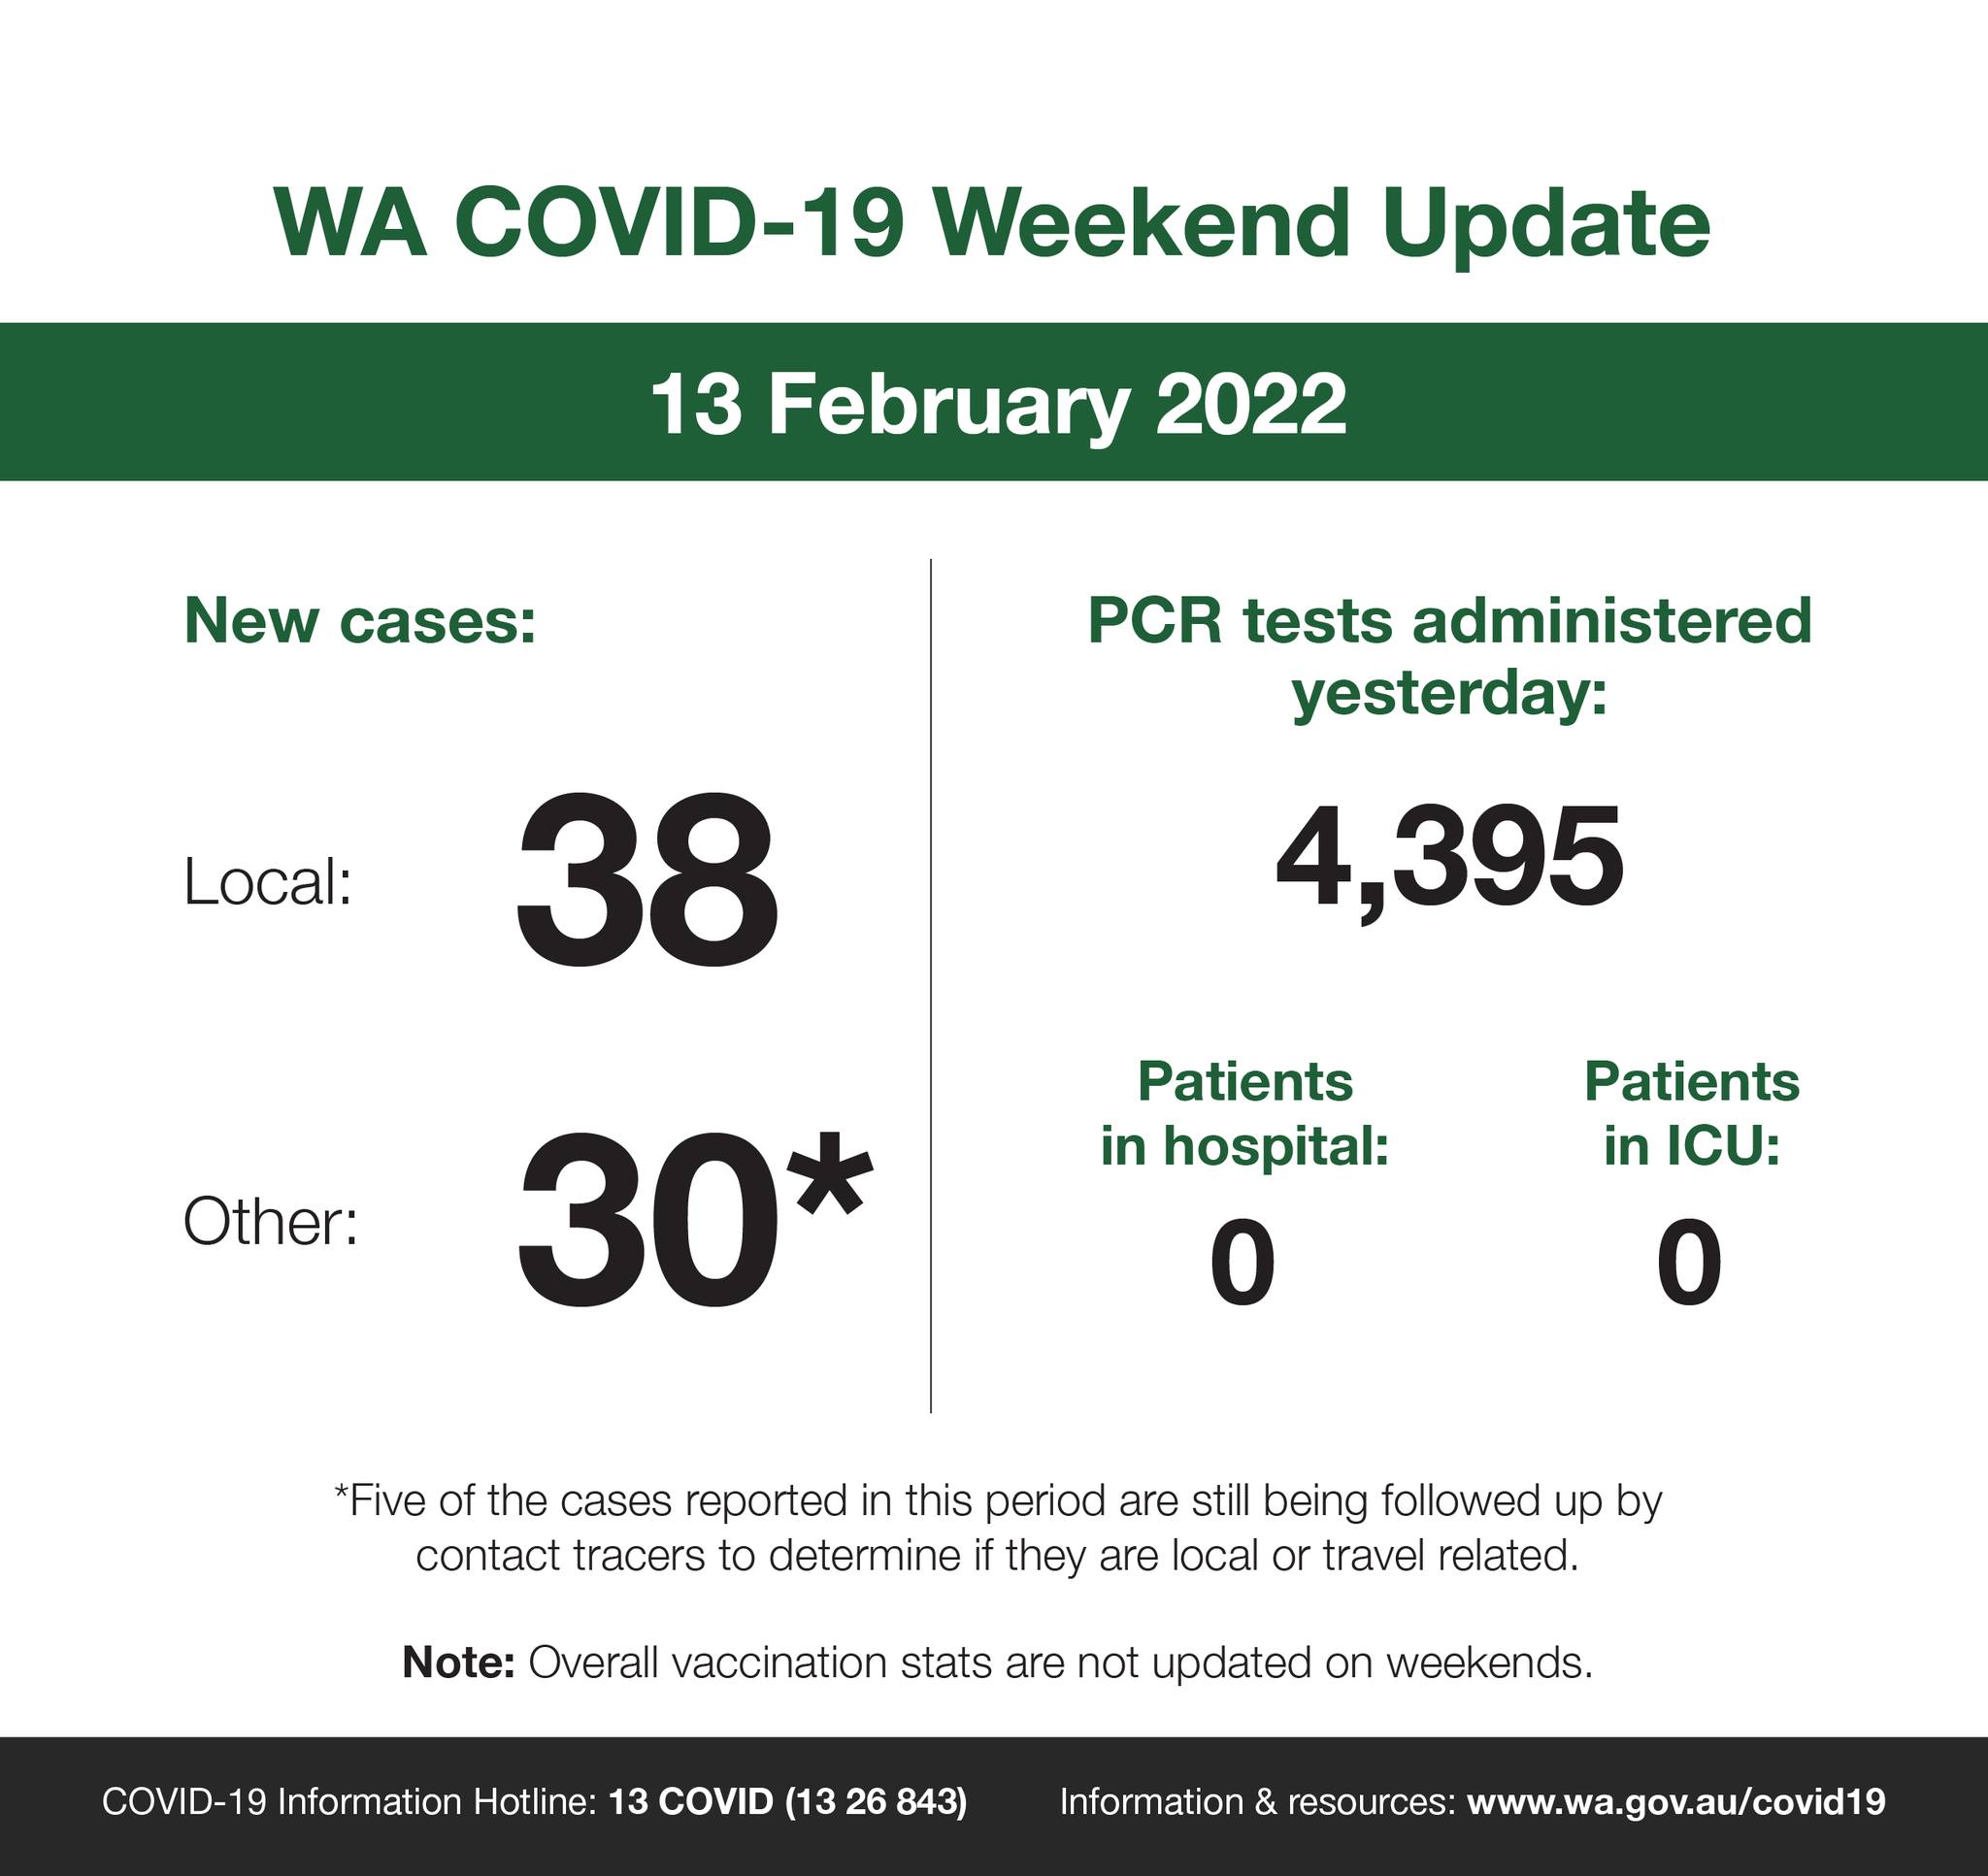 May be an image of text that says 'WA COVID-19 Weekend Update 13 February 2022 New cases: PCR tests administered yesterday: Local: 38 4,395 Other: Patients in hospital: 0 30* Patients in ICU: 0 *Five of the cases reported in this period are still being followed up by contact tracers to determine they are local or travel related. Note: Overall vaccination stats are not updated on weekends. COVID- Information Hotline: COVID (13 26 843) nformation resources: www.wa.gov.au/covid19'